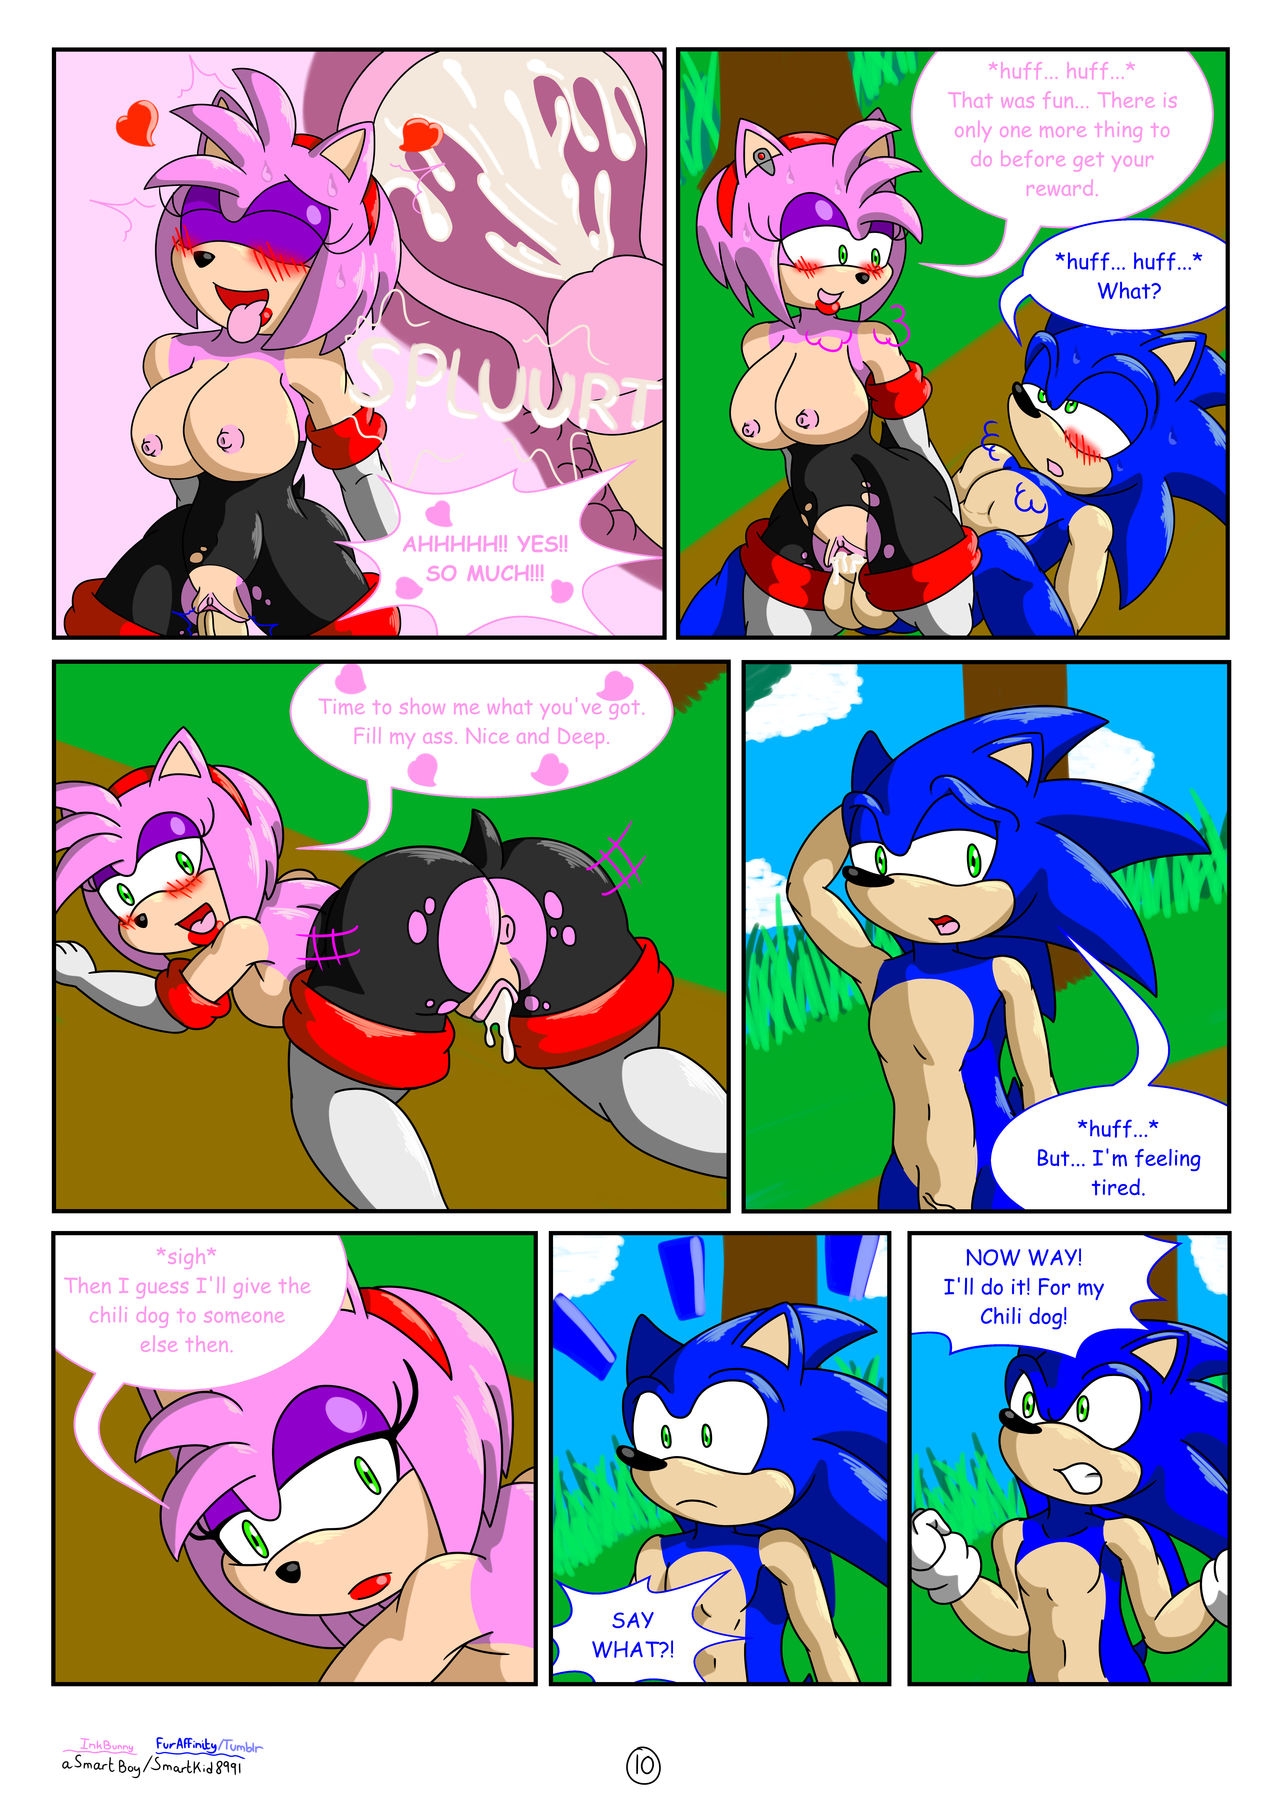 [SmartKid8991] Agent Whore Bootcamp (Sonic The Hedgehog) [Ongoing] 10